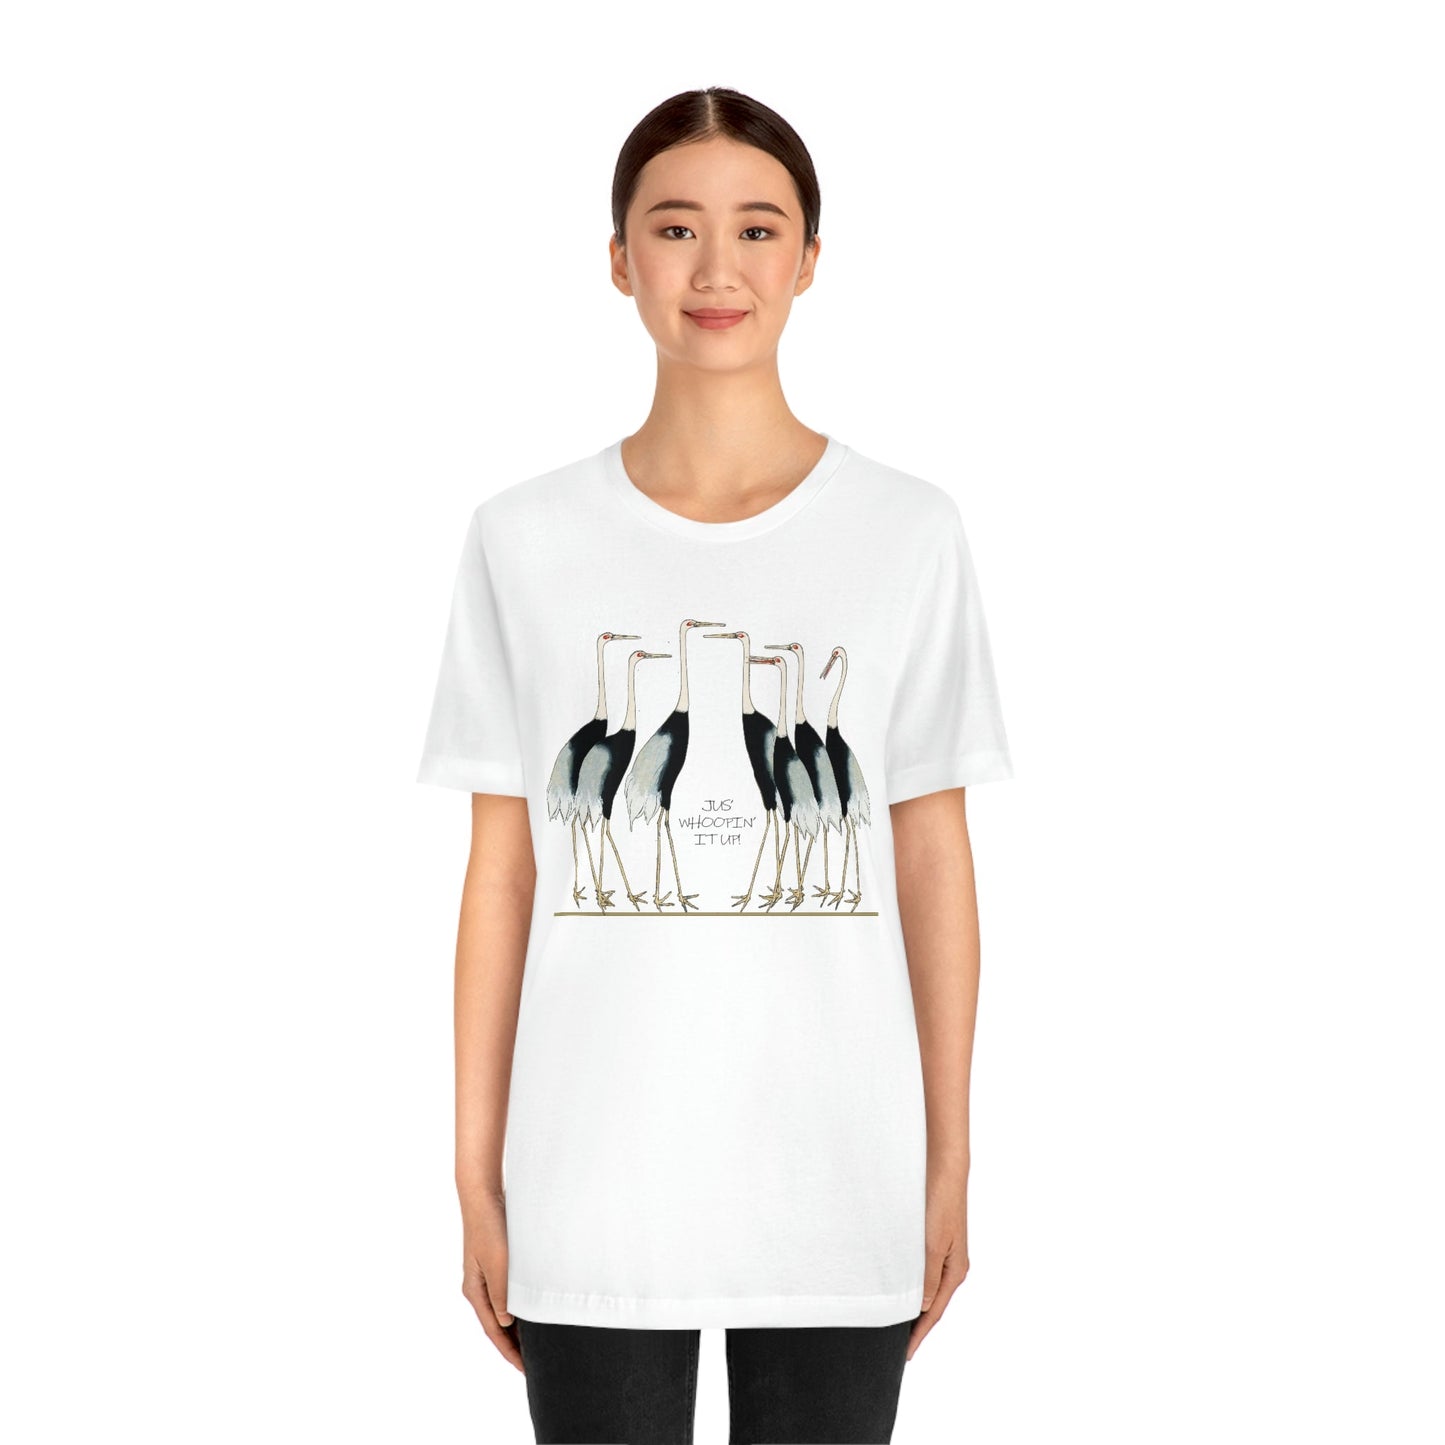 Just Whopping It Up - Whooping Crane - Jersey Short Sleeve Tee